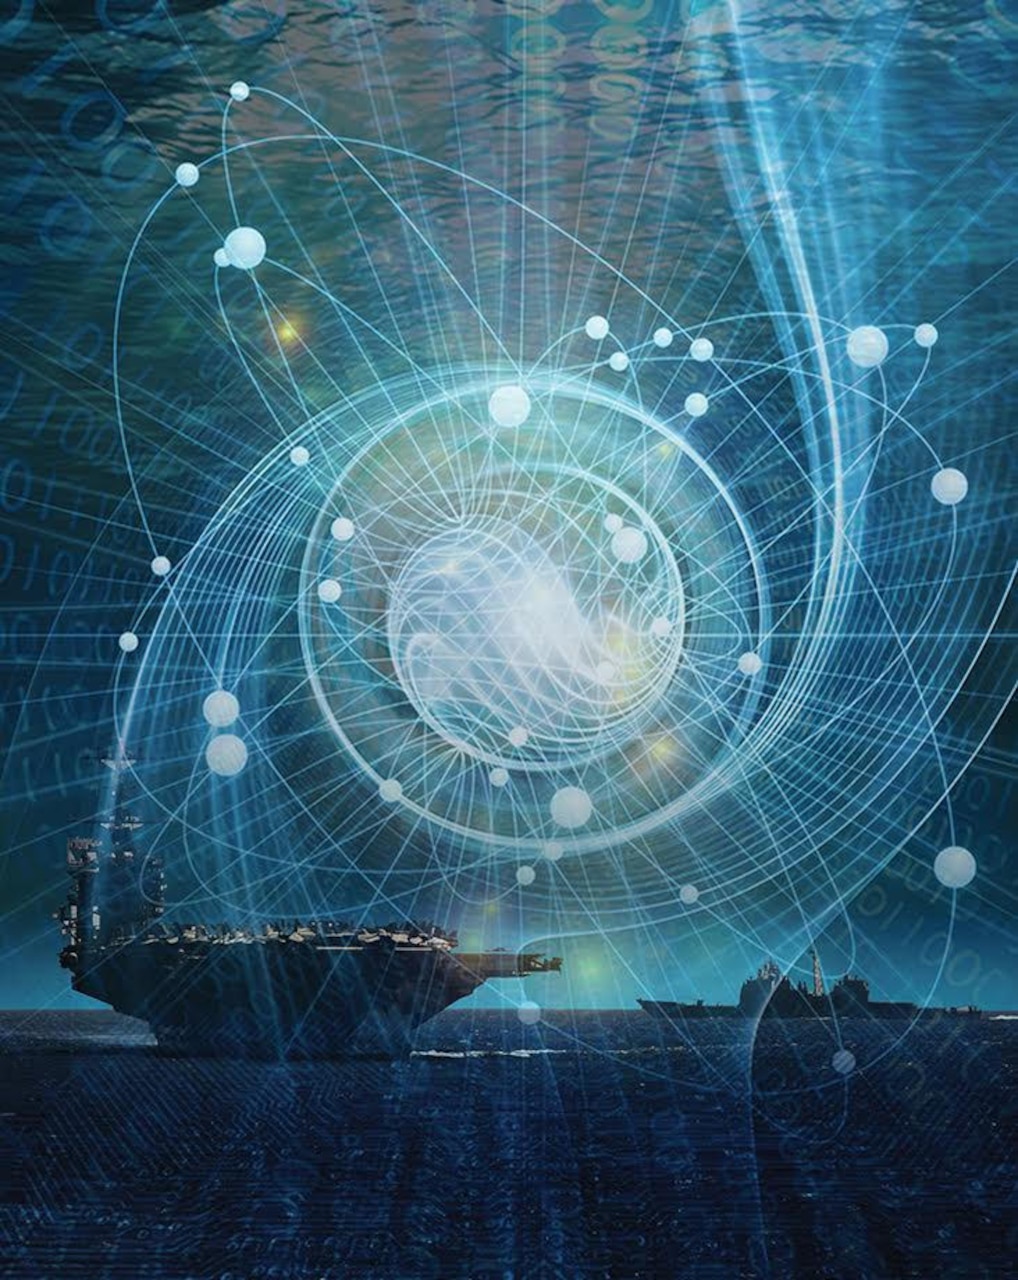 230215 -N-N1809-002 San Diego, CA (Feb. 15, 2023) A graphic concept of quantum technology depicts two ships at sea in the 7th Fleet AOR.